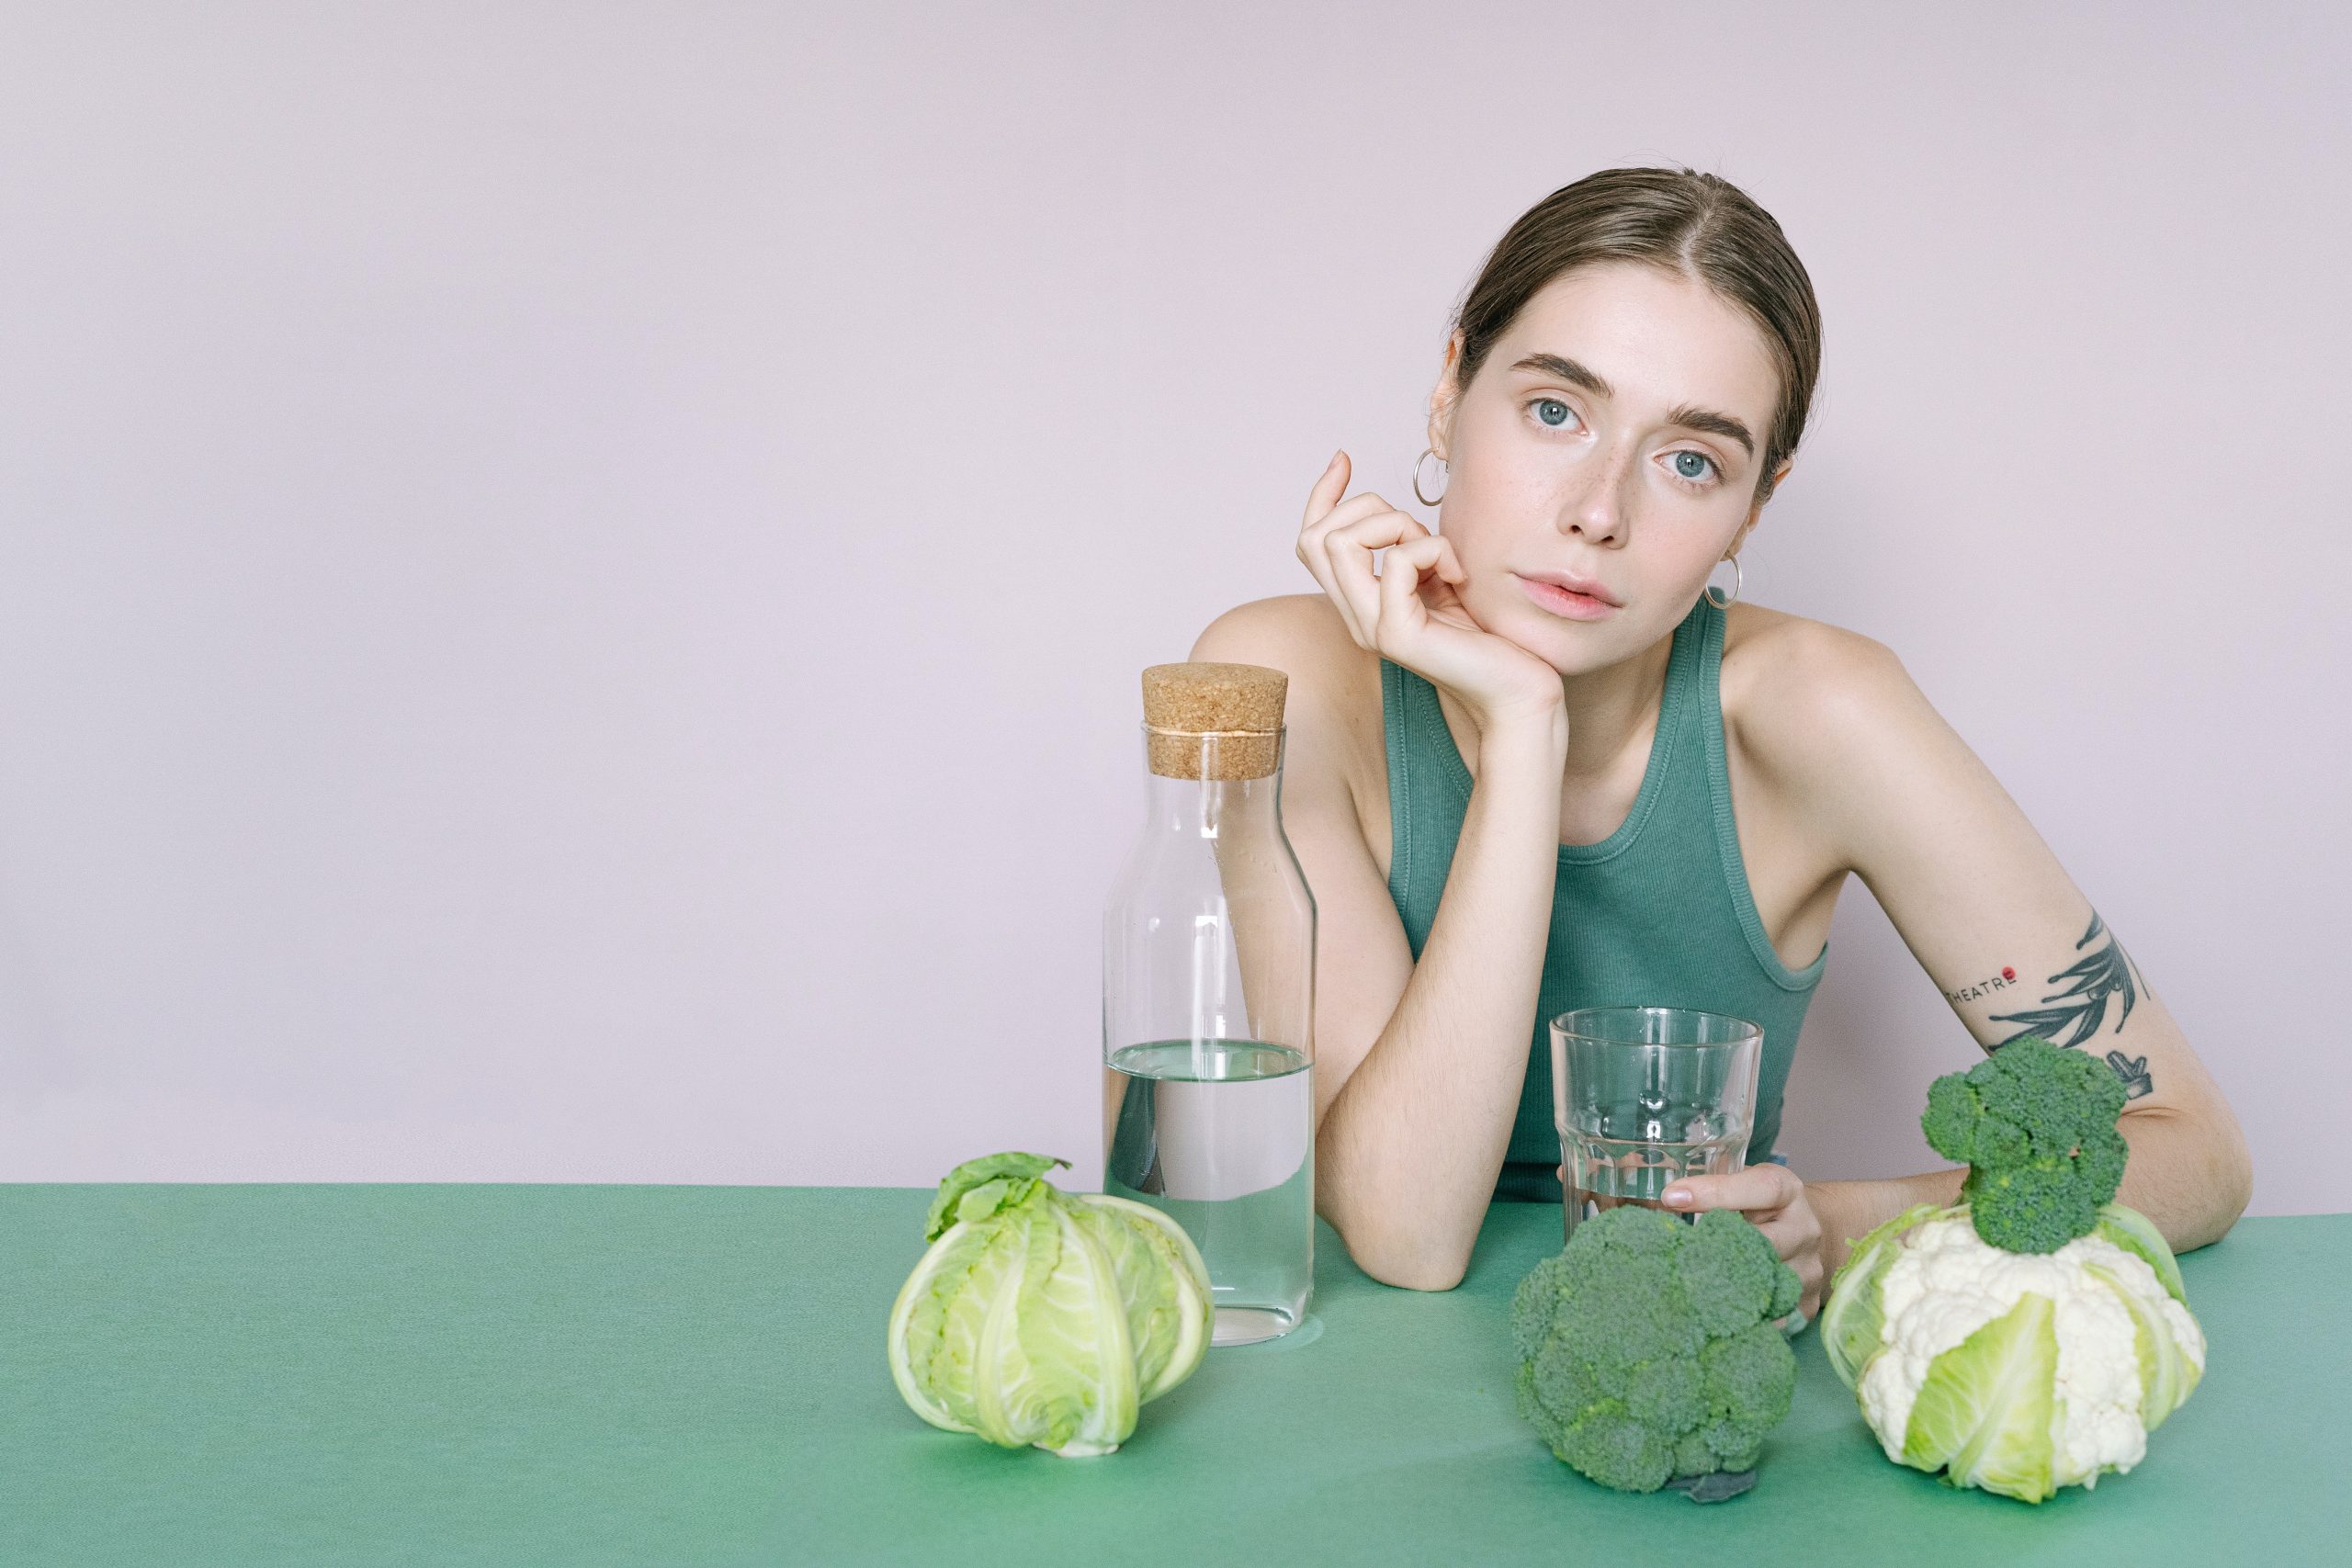 Does Cabbage Juice Cure Ulcers?